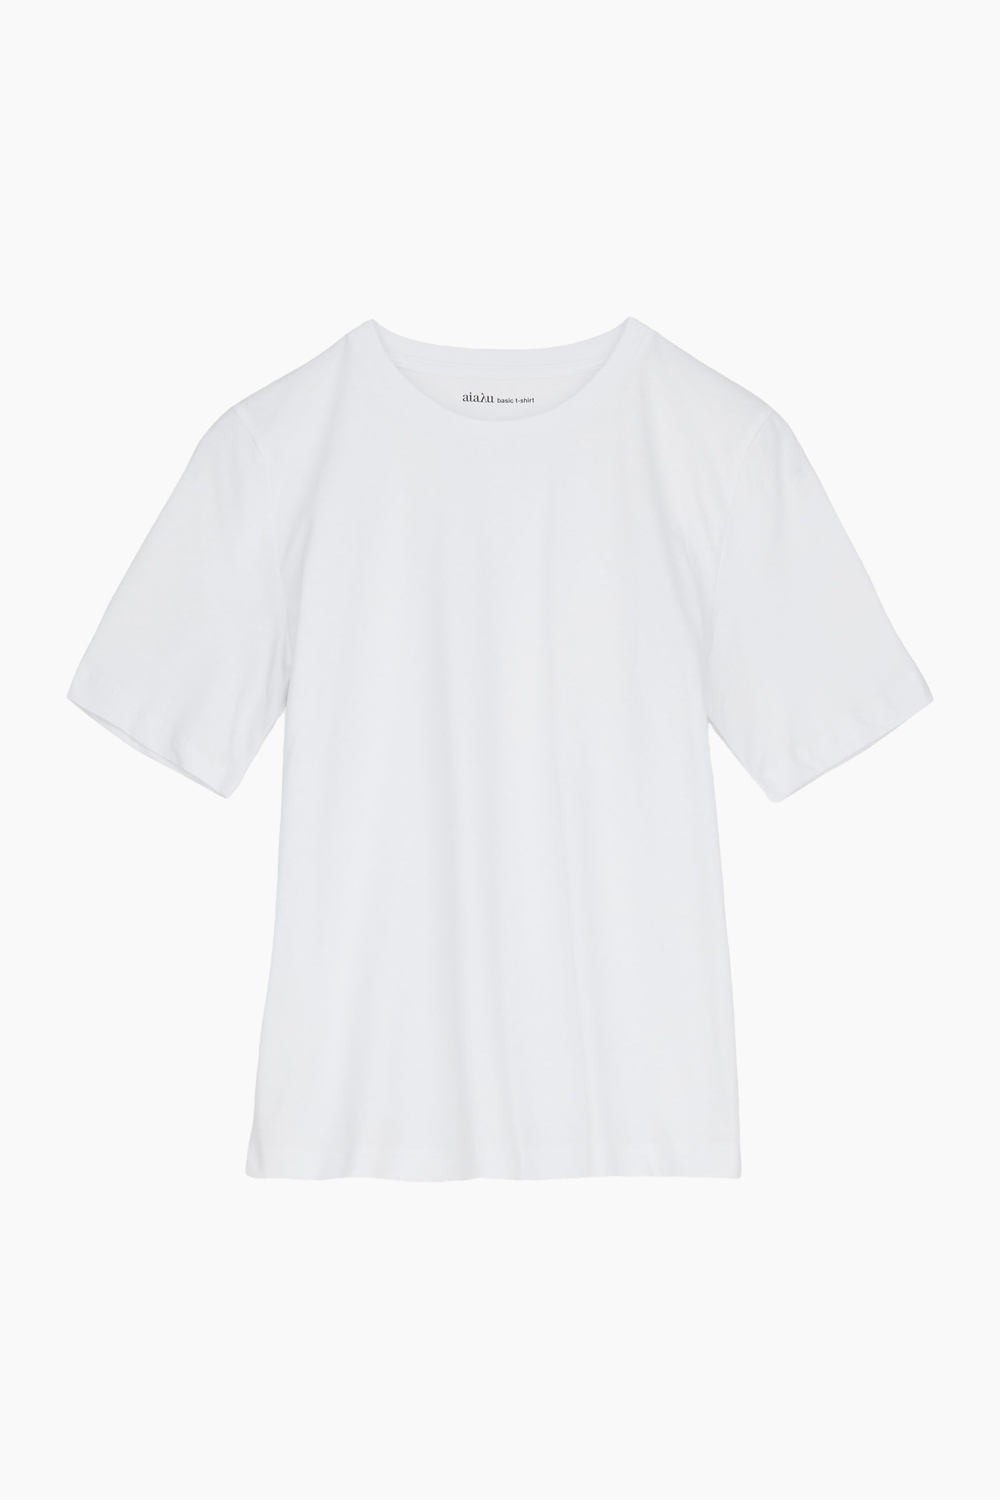 Short Sleeve Two Pack - White & Undyed - Aiayu